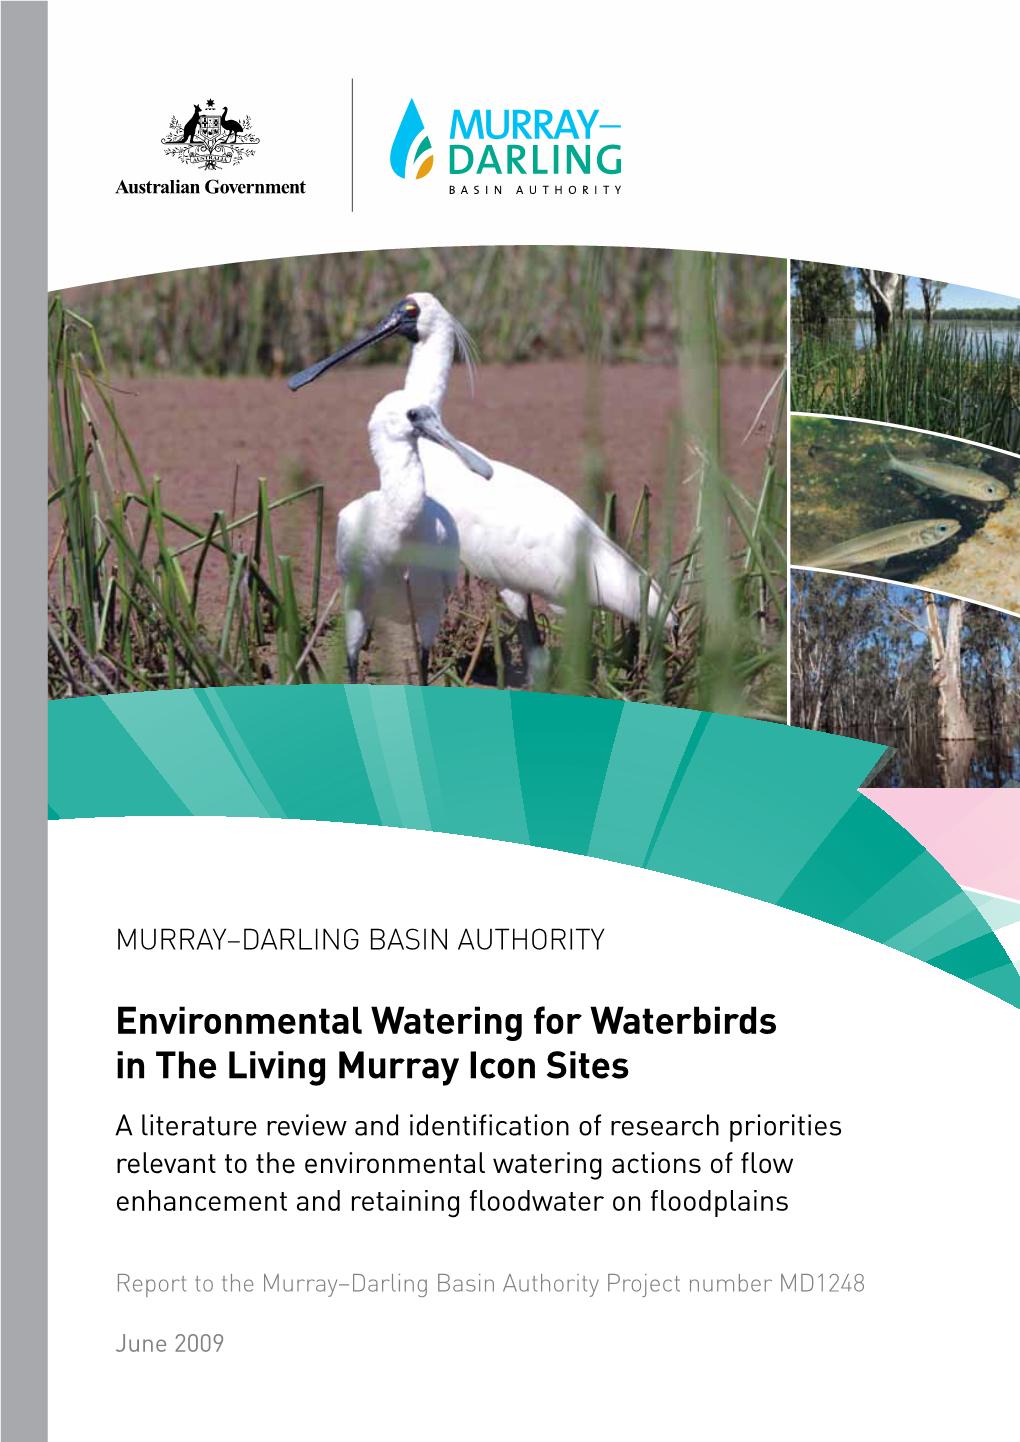 Environmental Watering for Waterbirds in the Living Murray